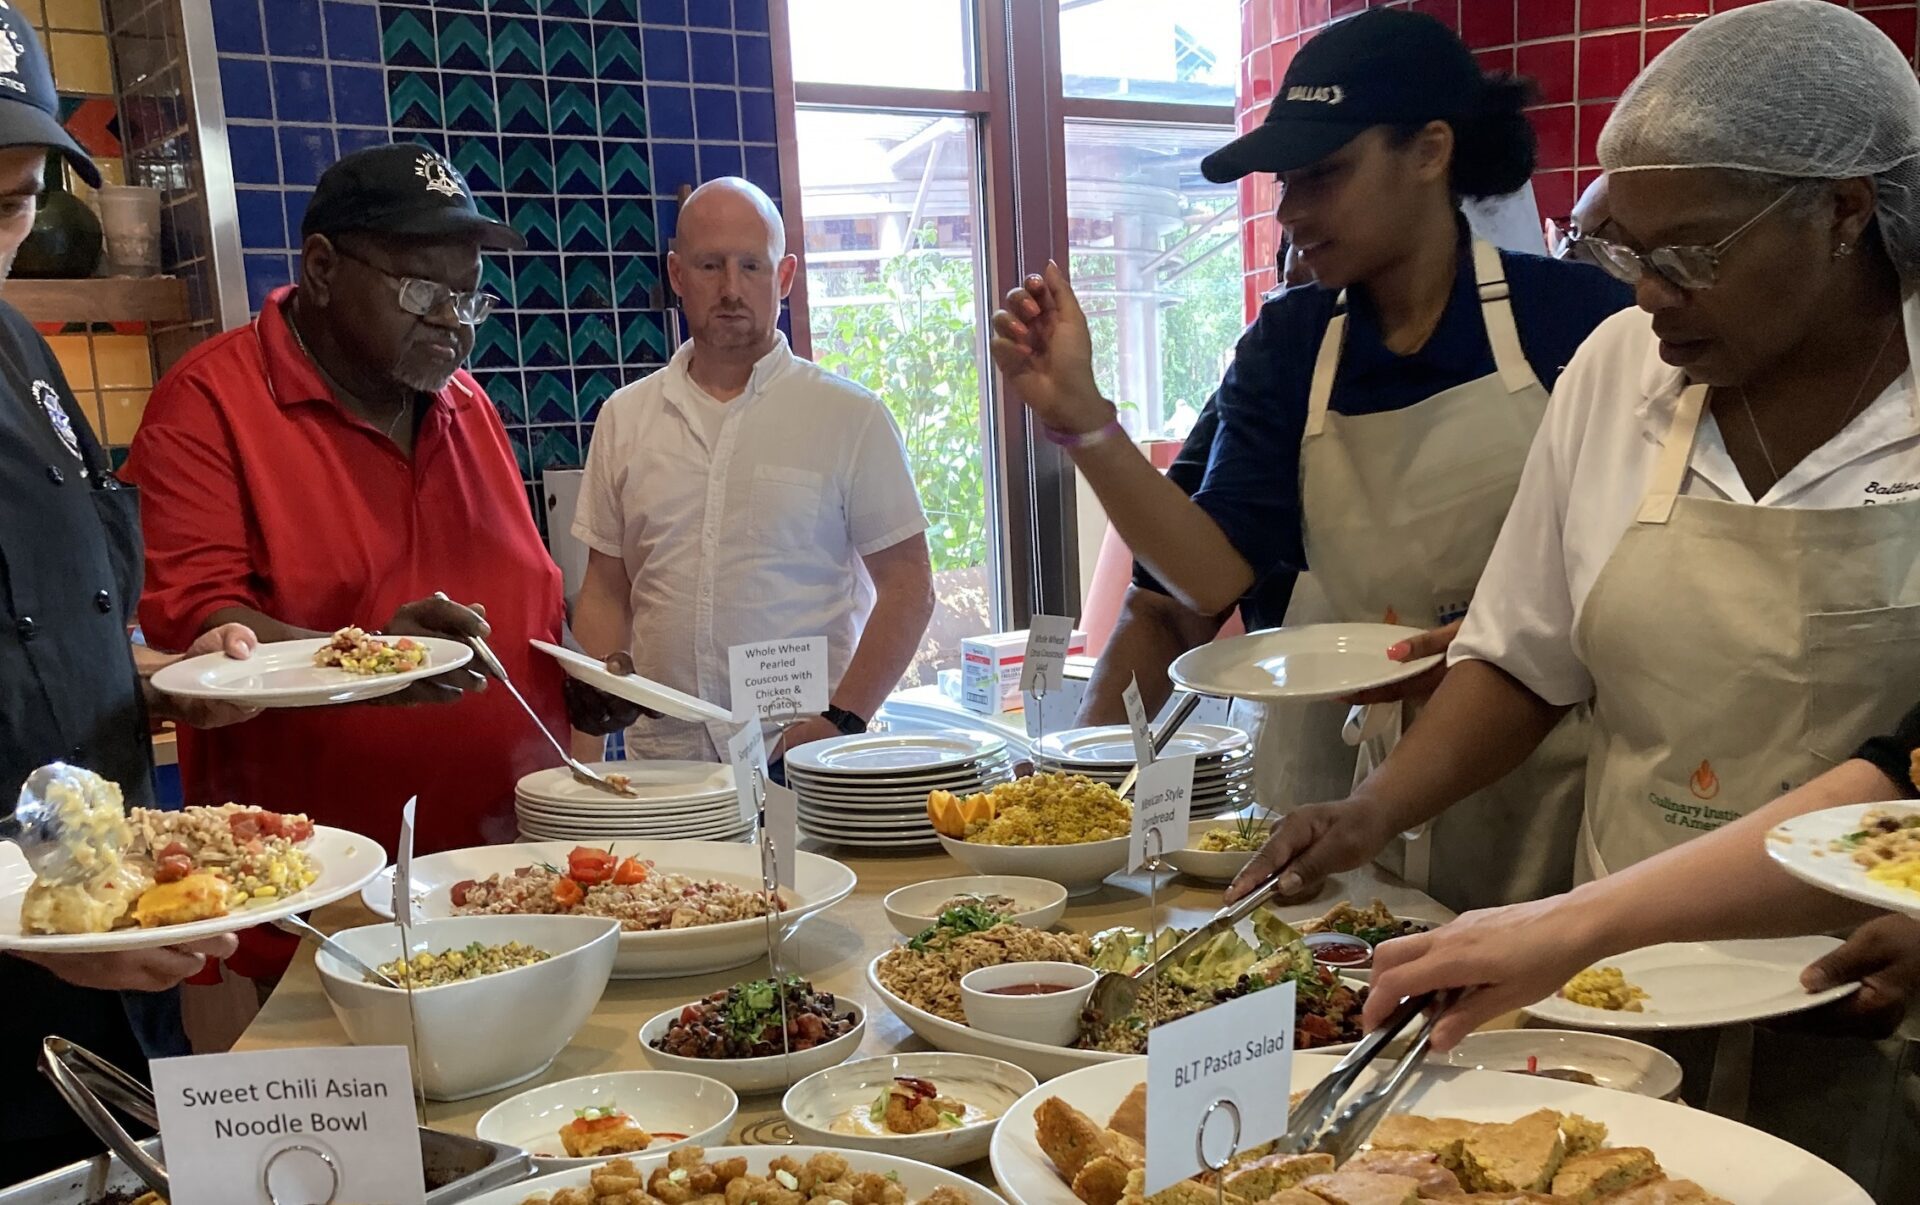 Andrew Urbanetti joins a group of people gathered around serving platters with foods and name plates, including recipes titled “Sweet Chili Asian Noodle Bowl’ and “BLT Pasta Salad.”